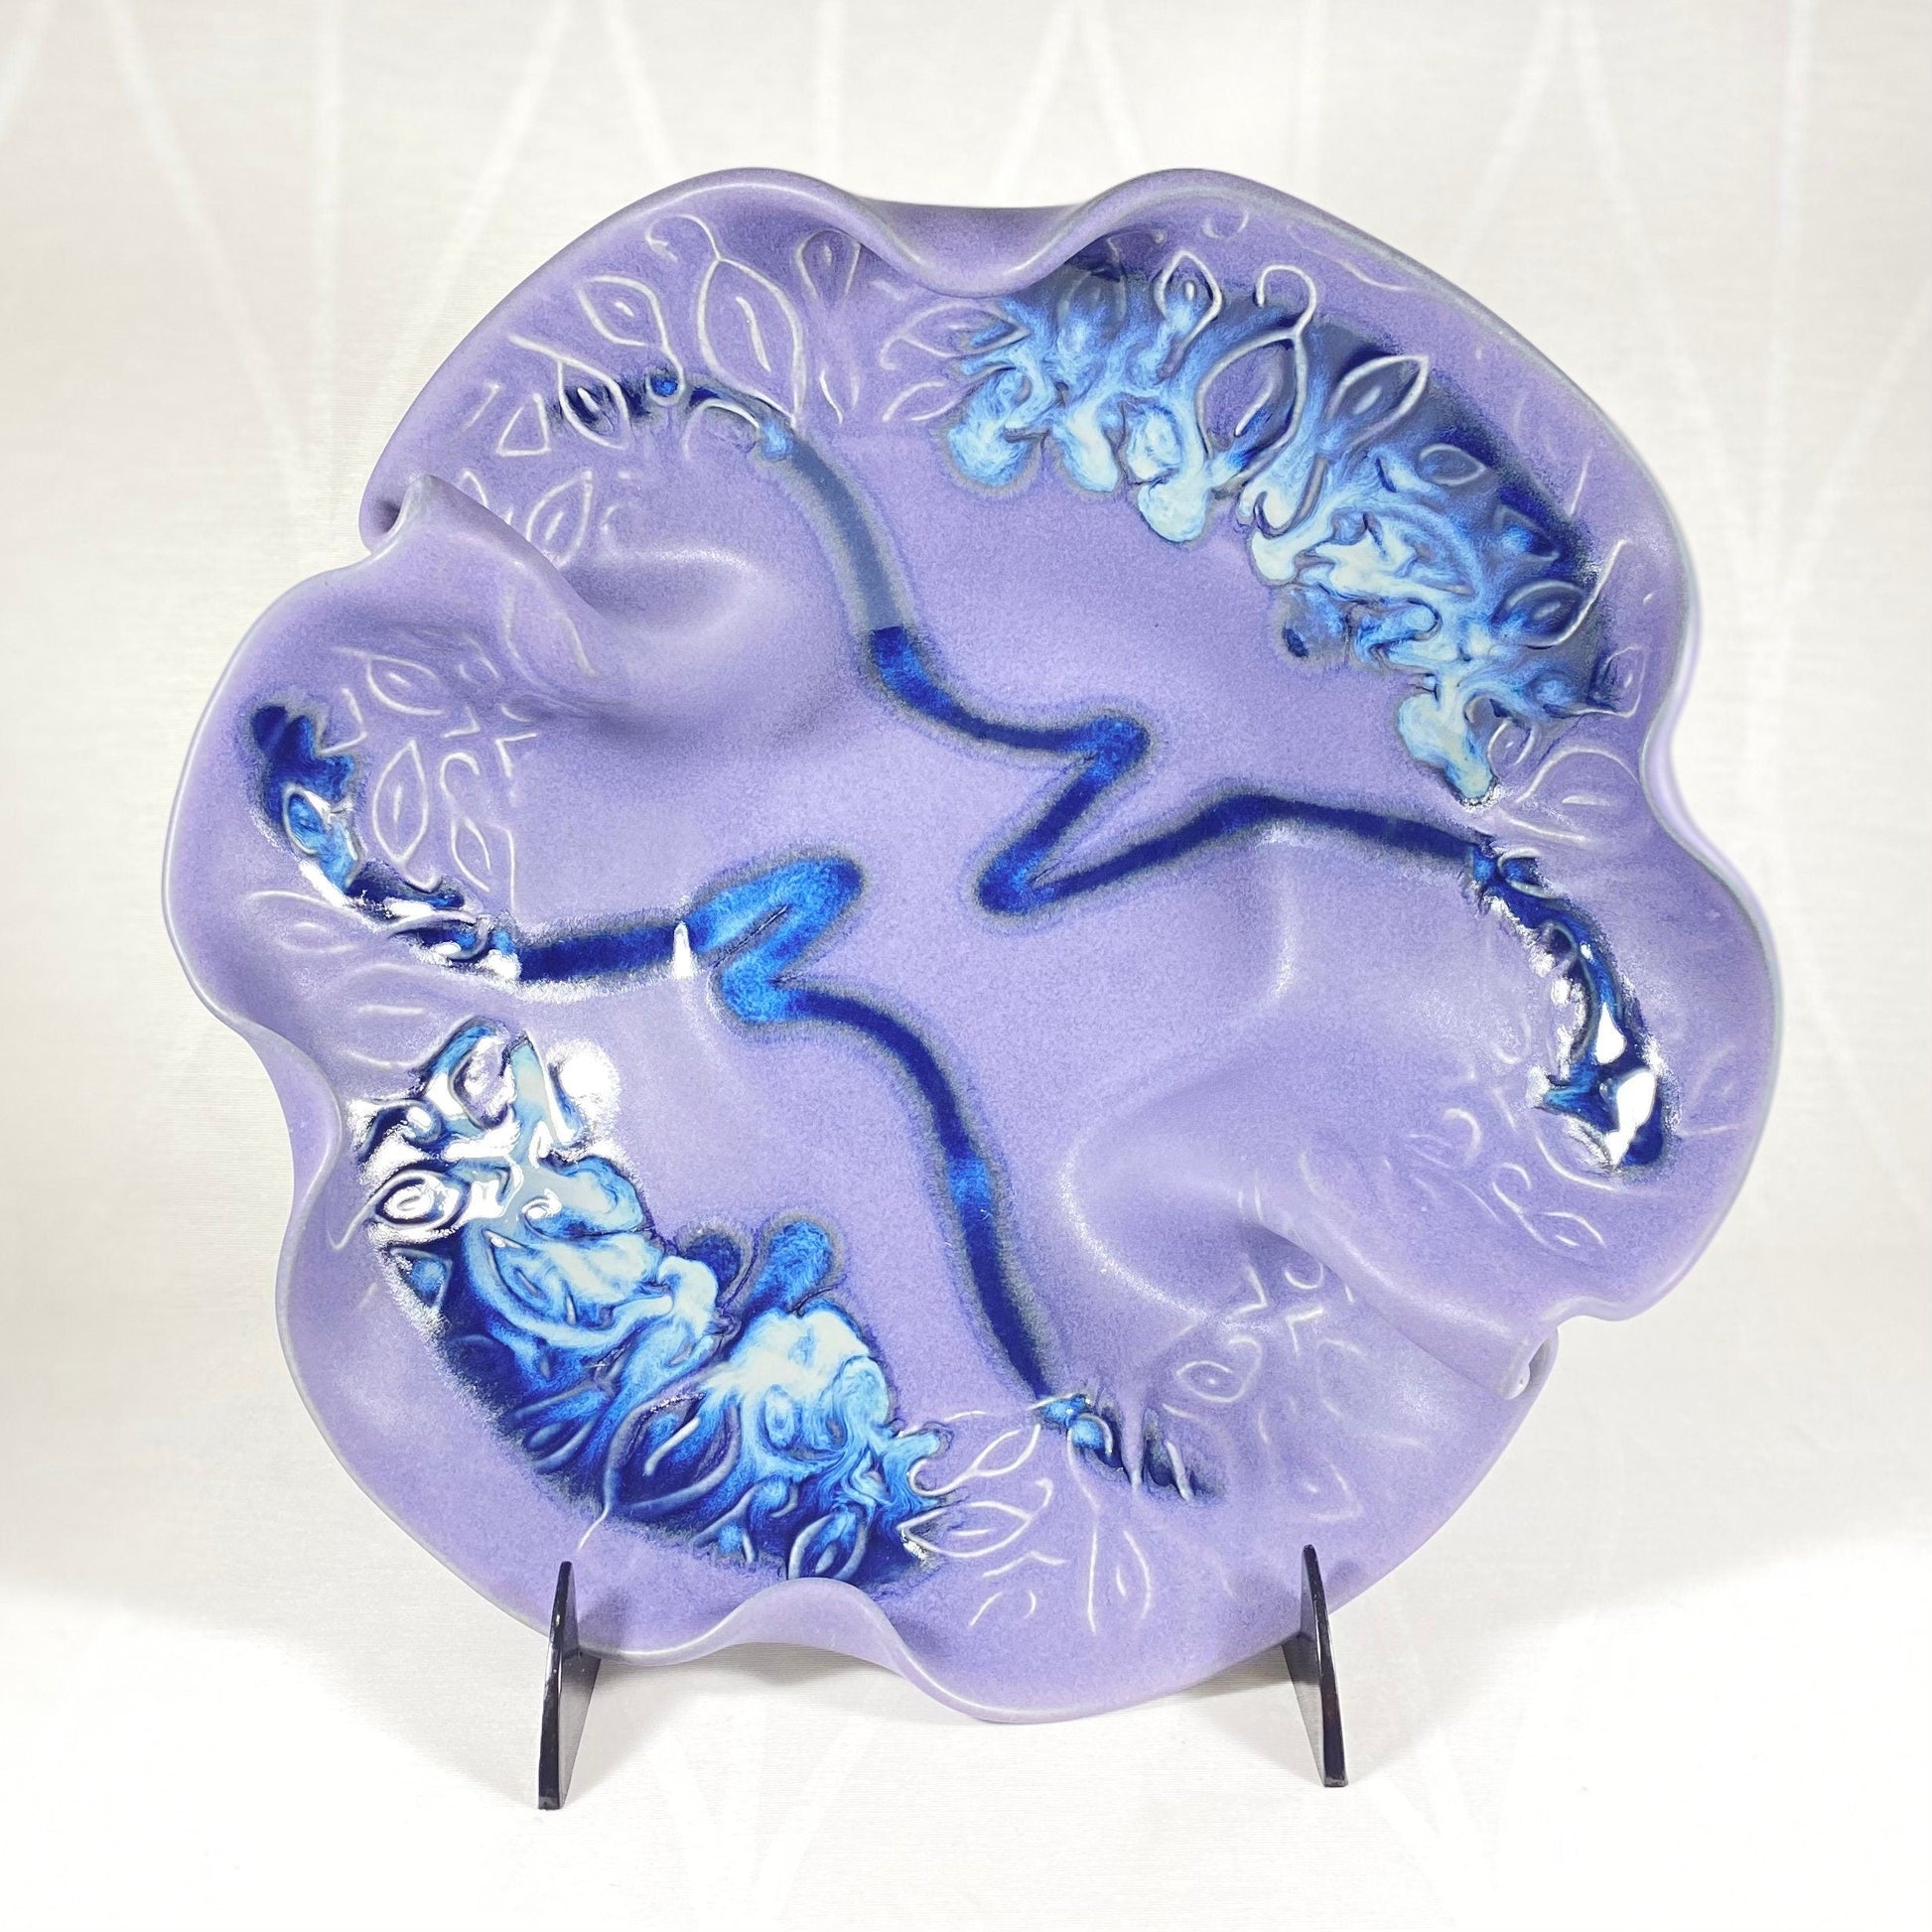 Handmade Purple and Blue In Between Bowl with Serving Spoons, Functional and Decorative Pottery